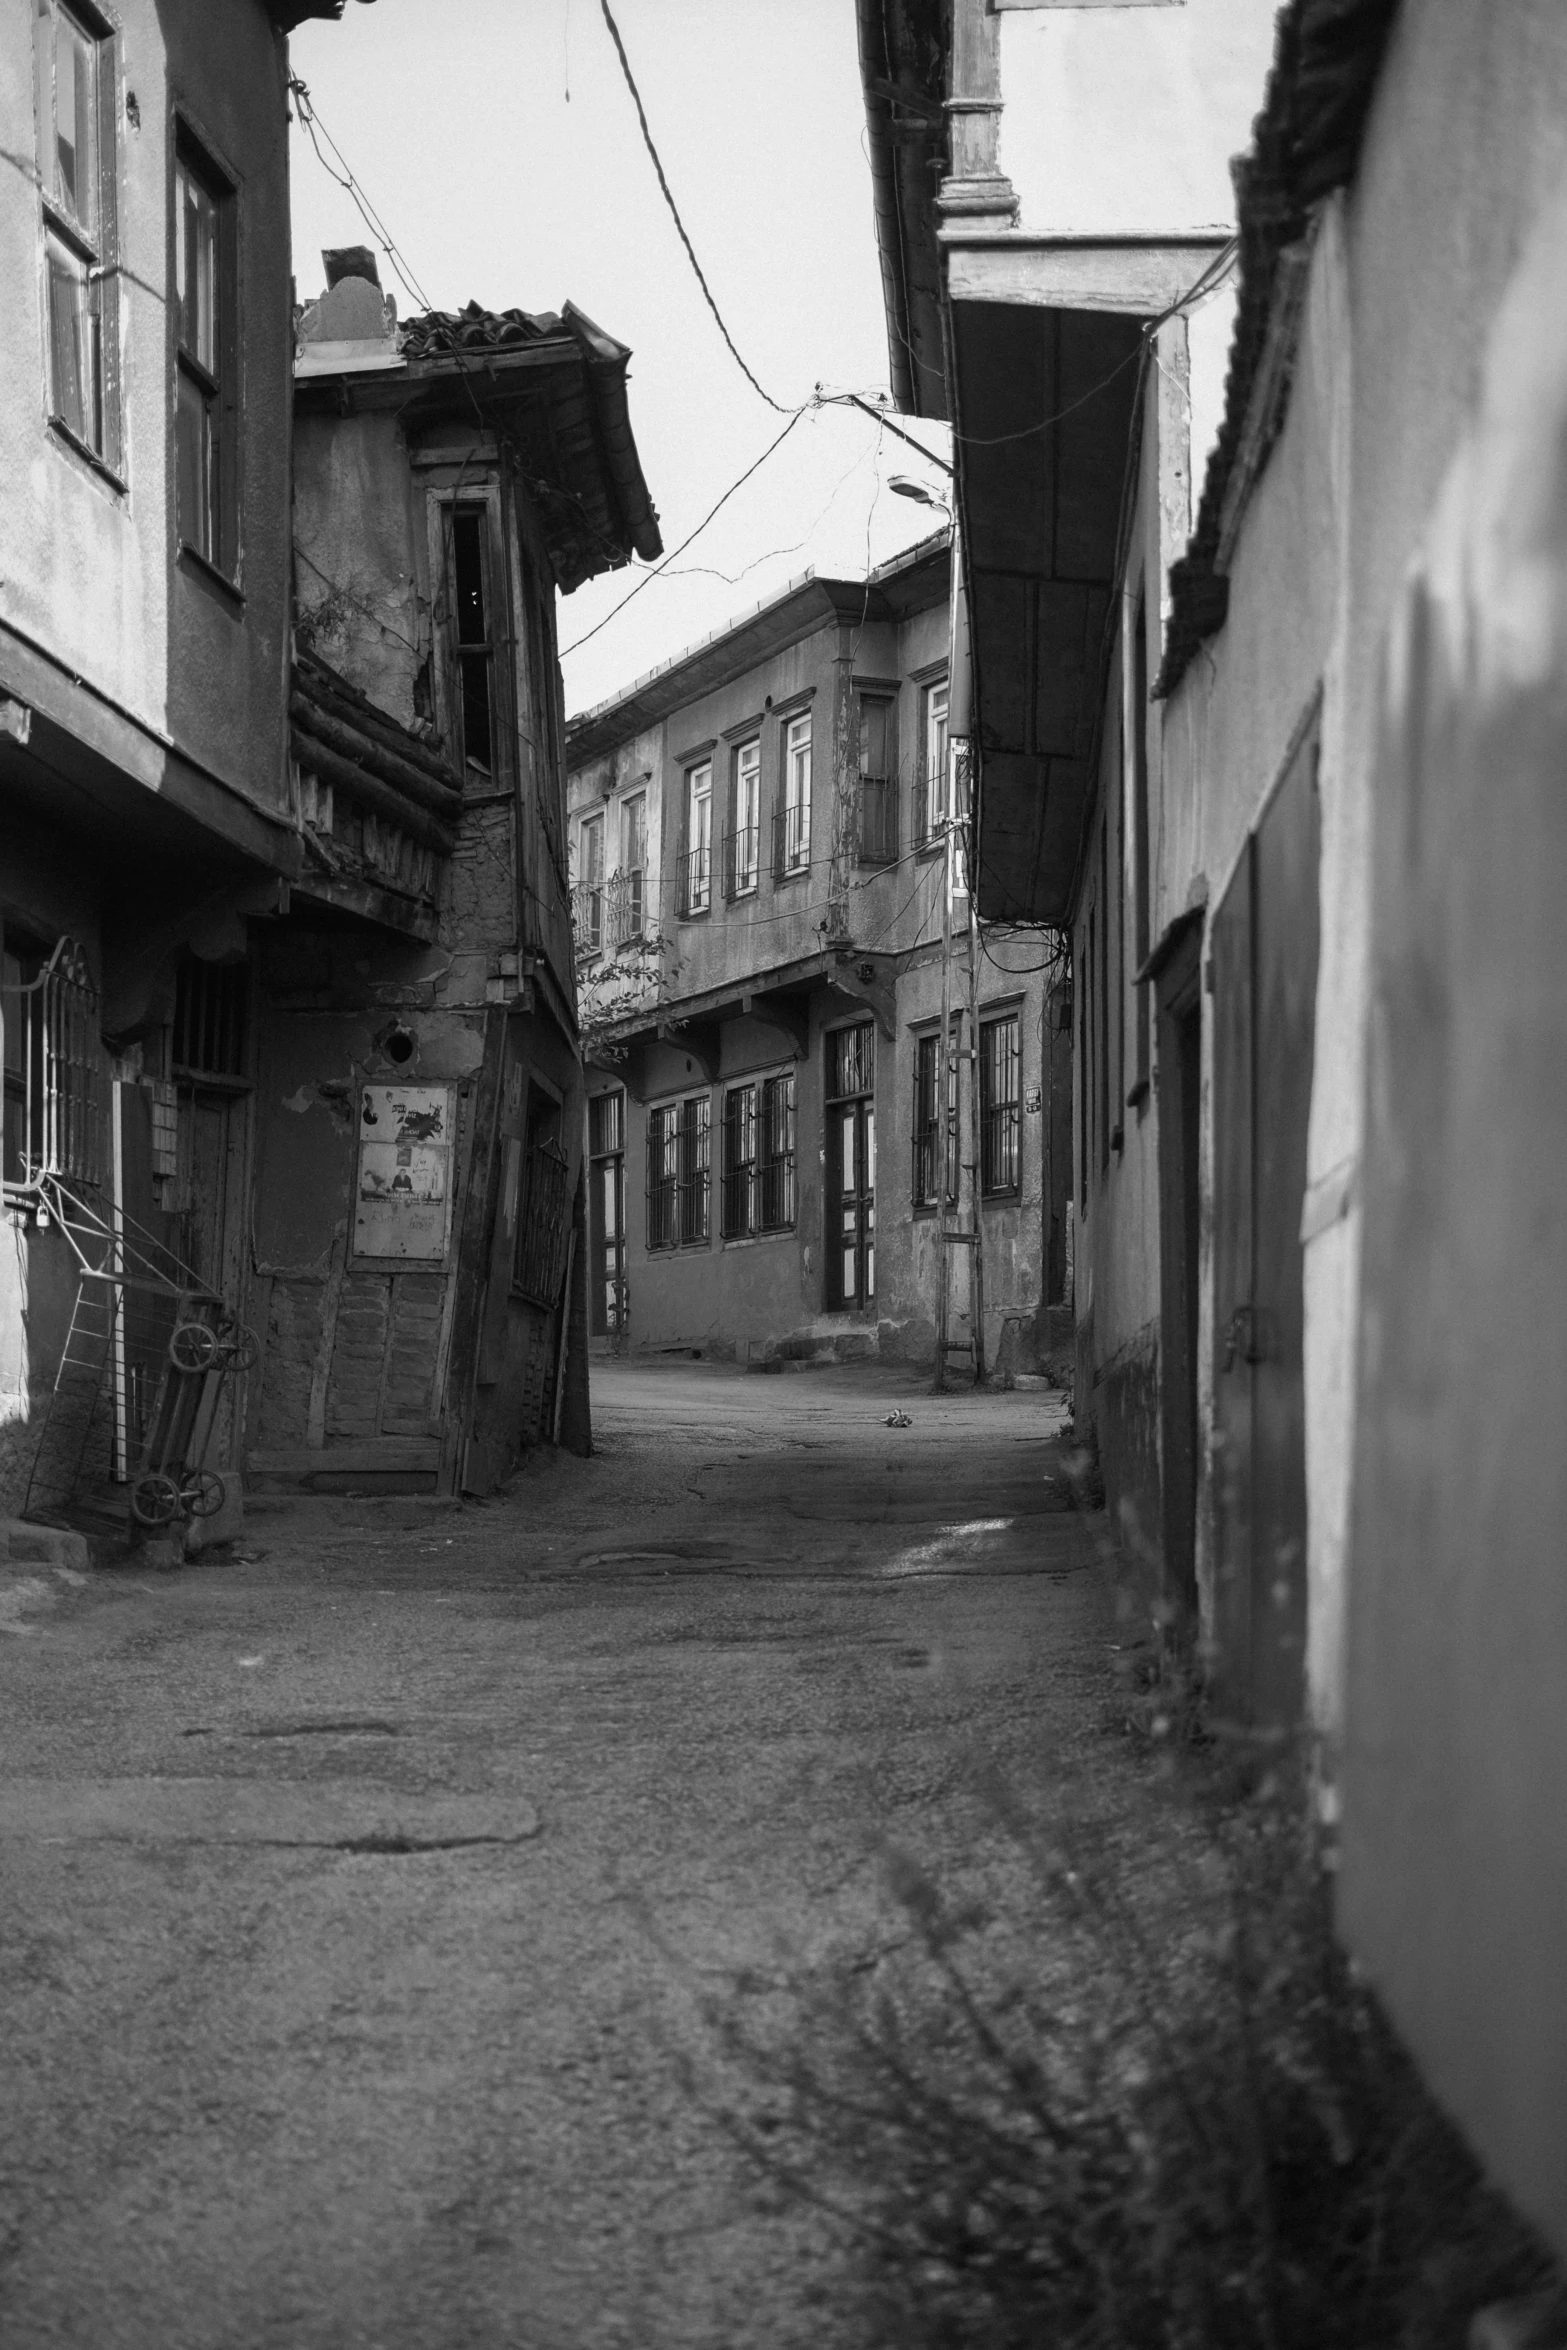 an old city street with abandoned buildings on both sides